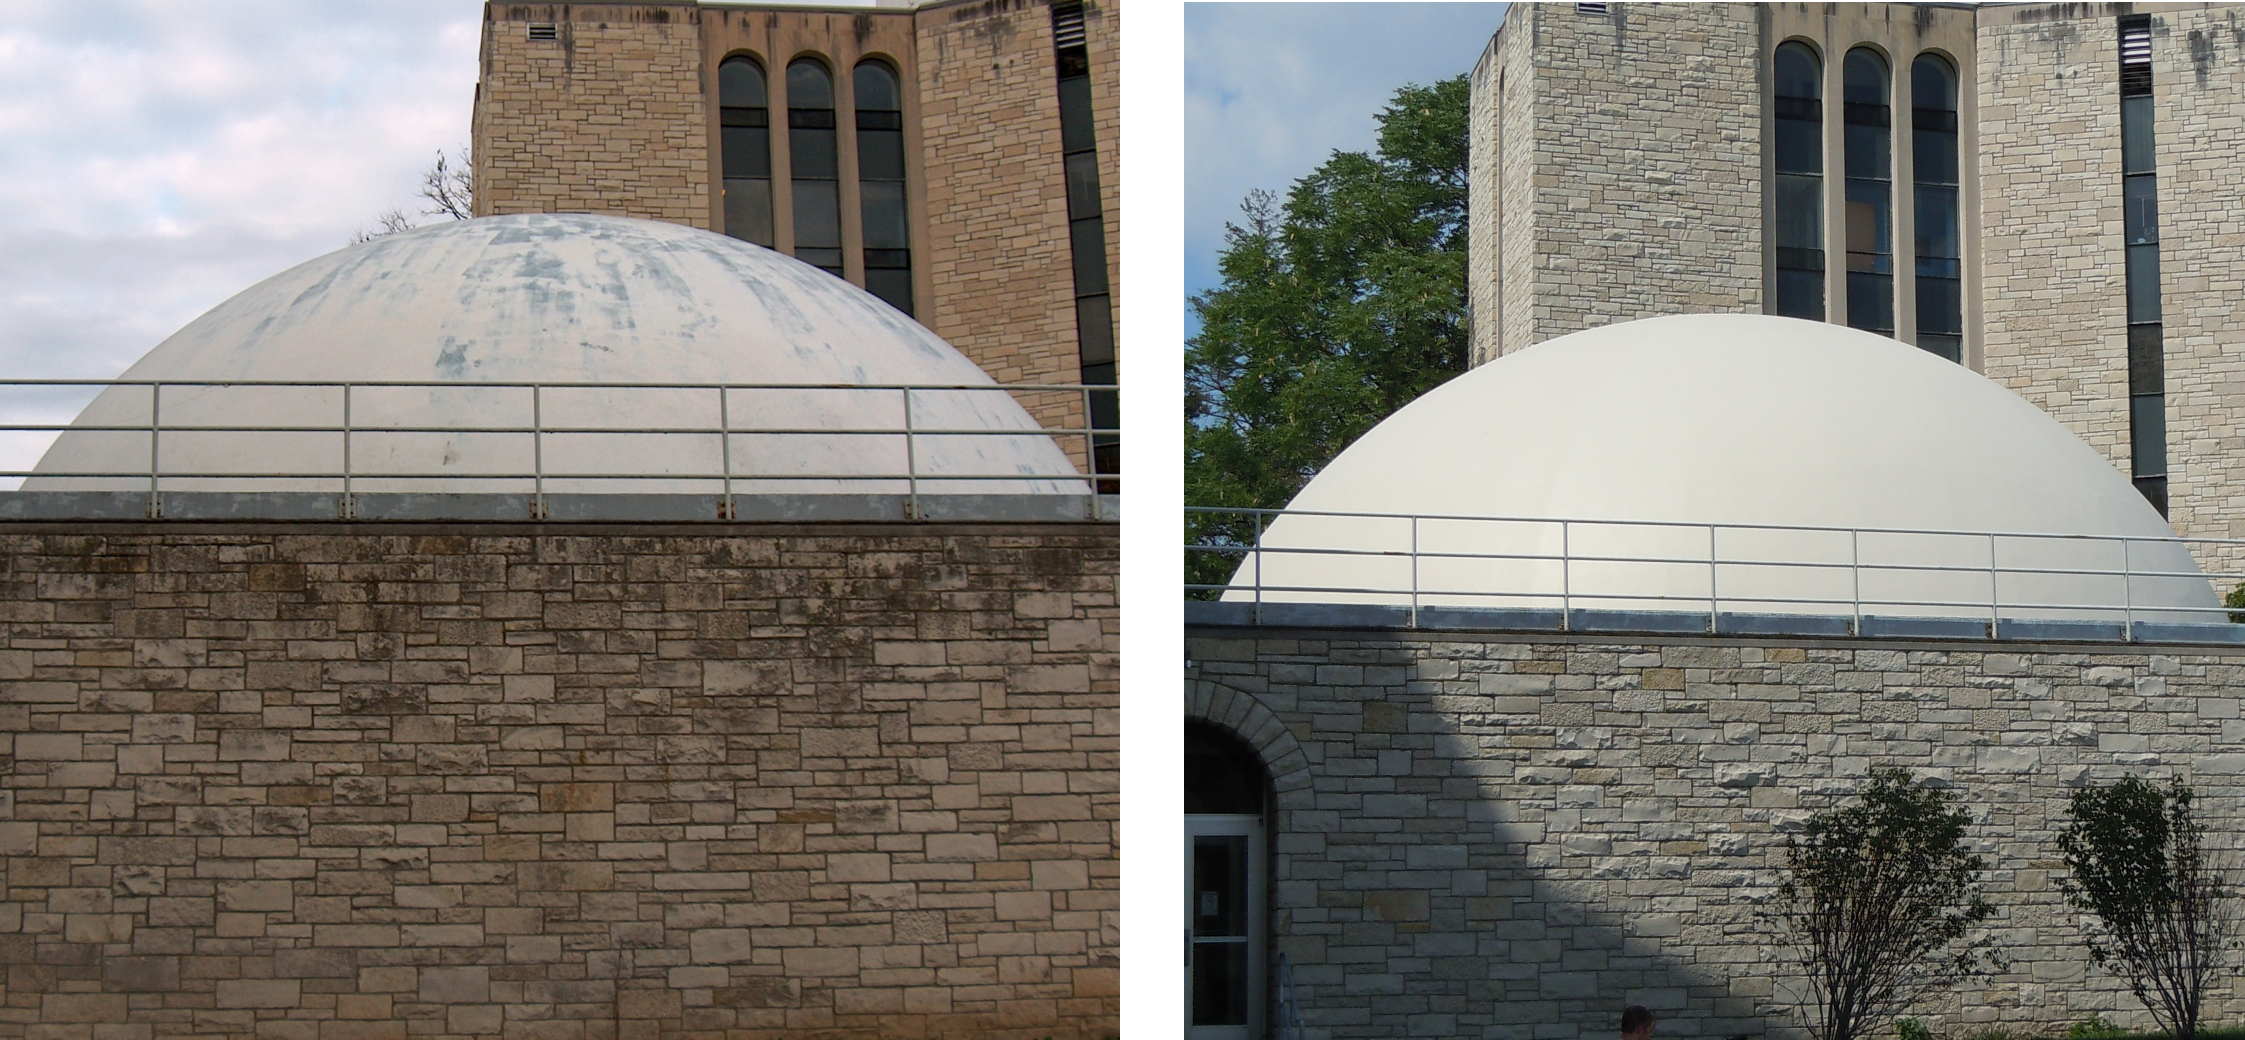 The planetarium dome before and after its repainting